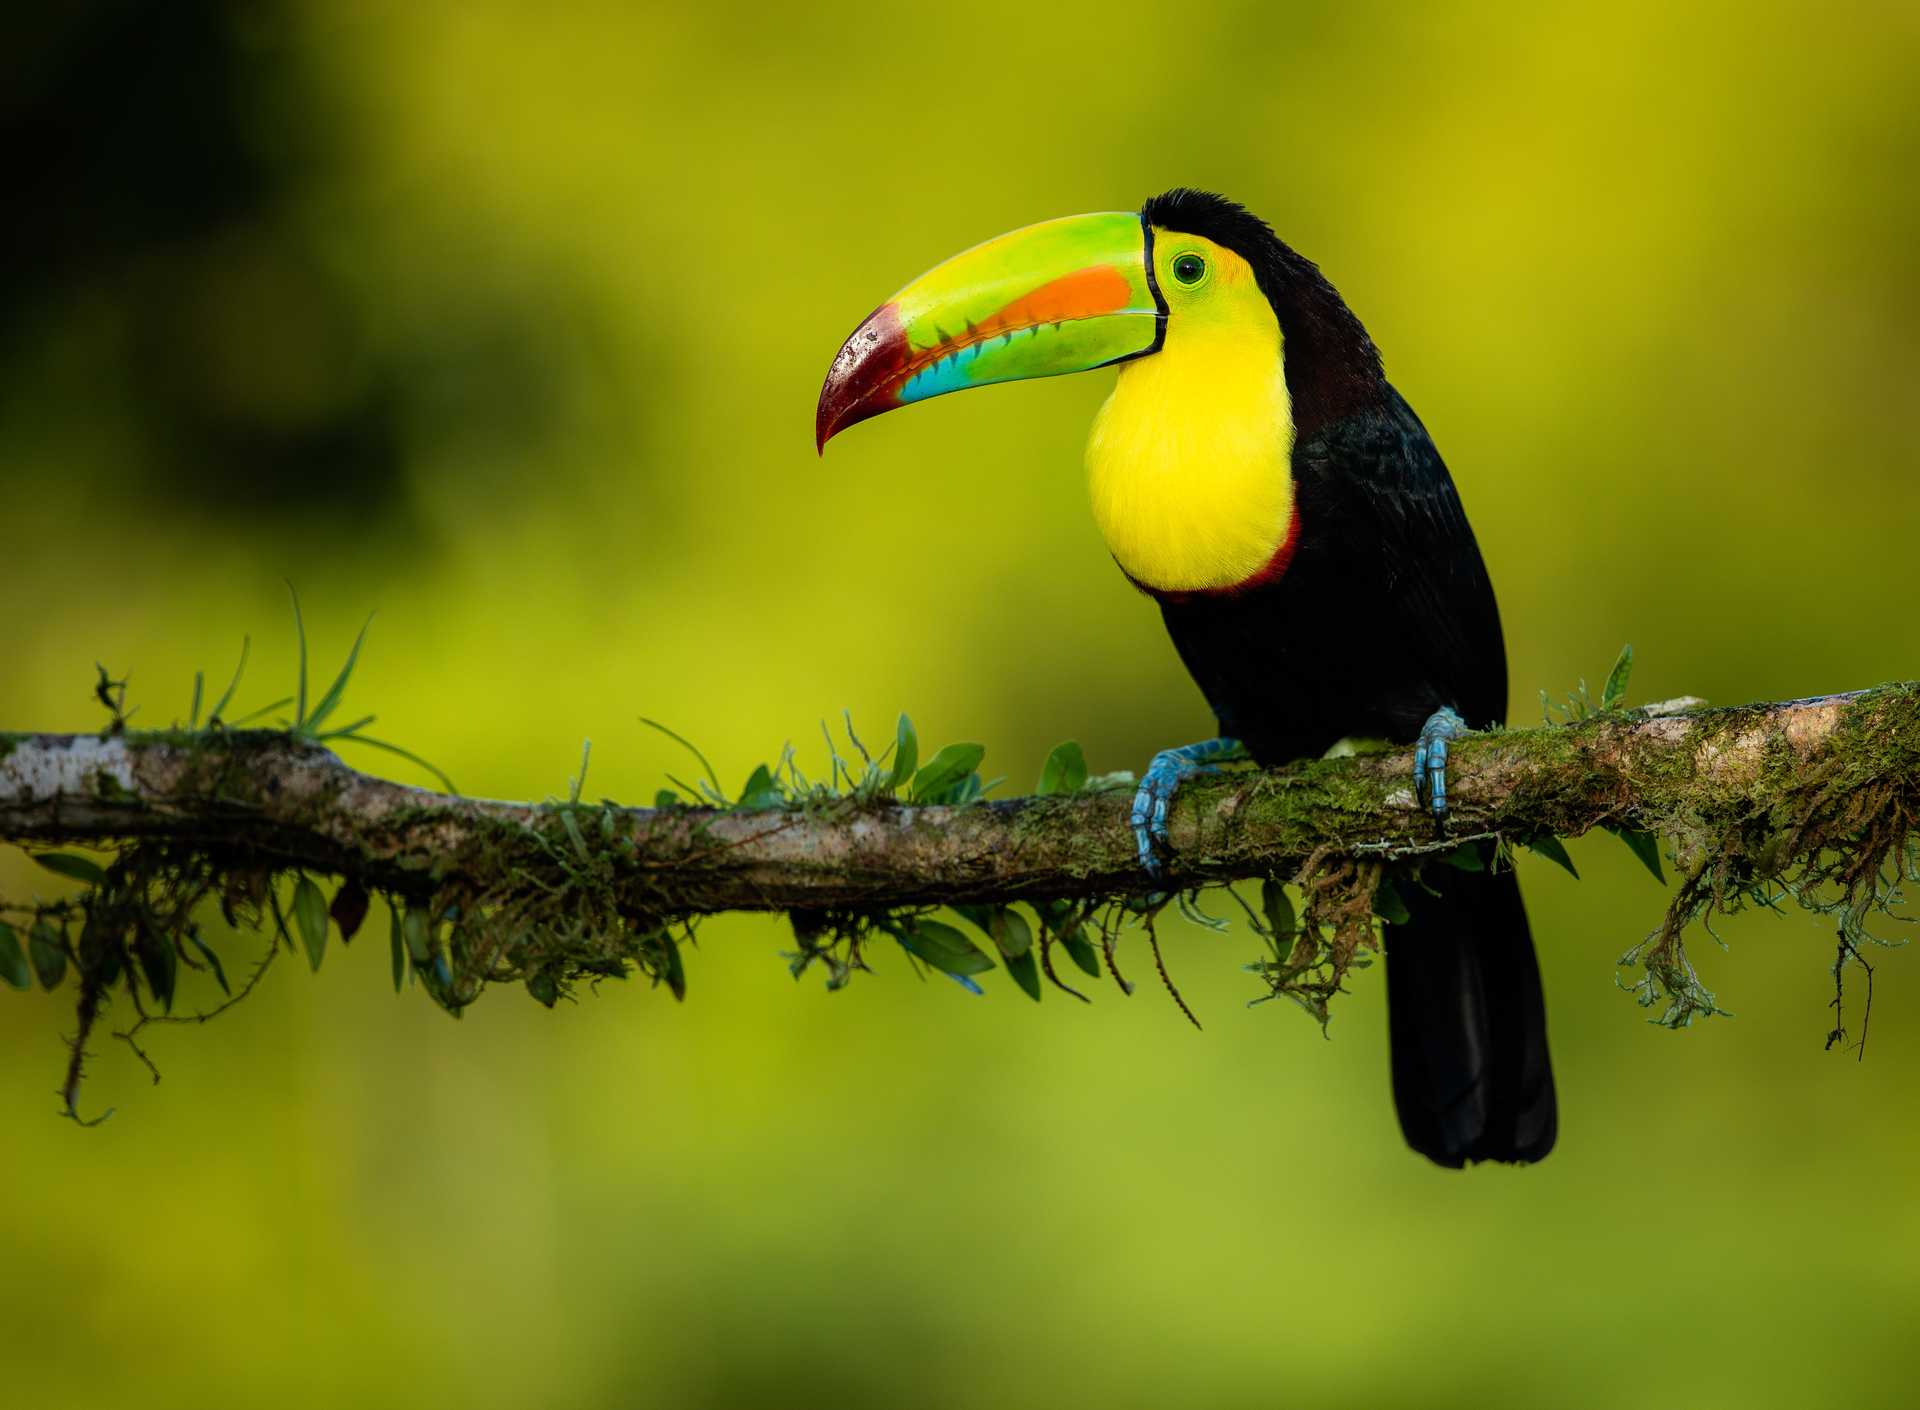 A toucan standing on the branch of a tree